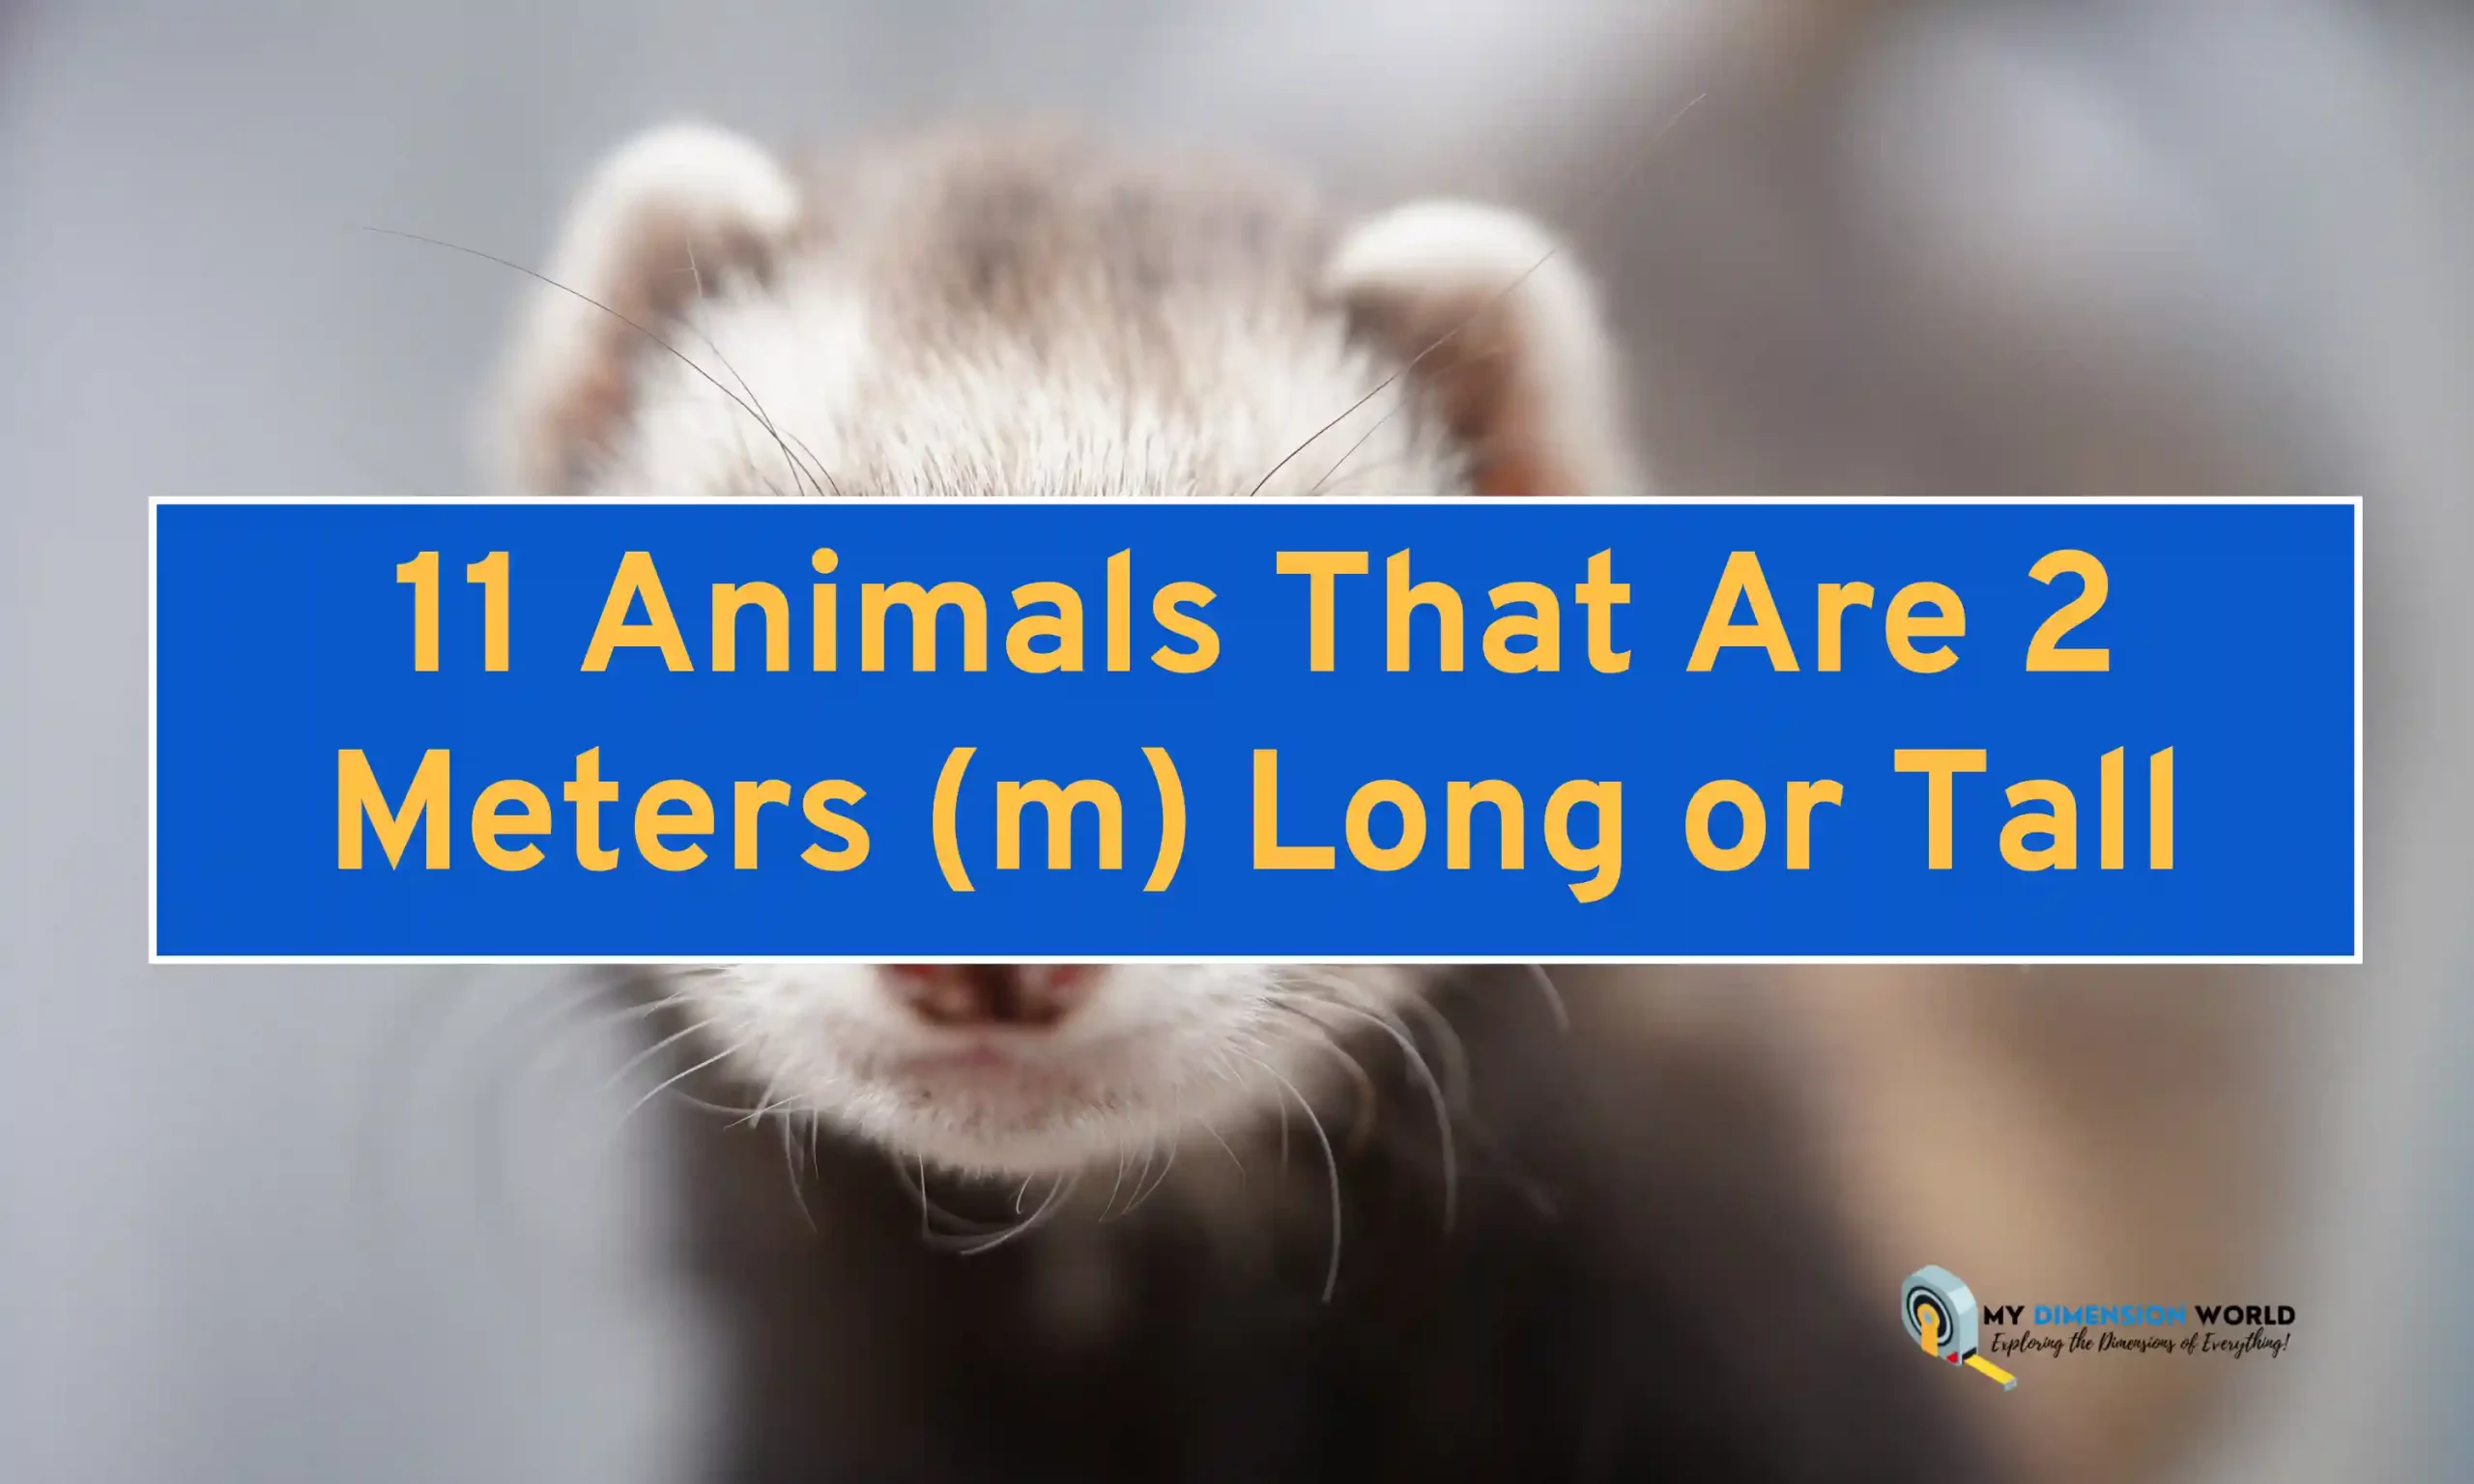 11 Animals That Are 2 Meters (m) Long or Tall